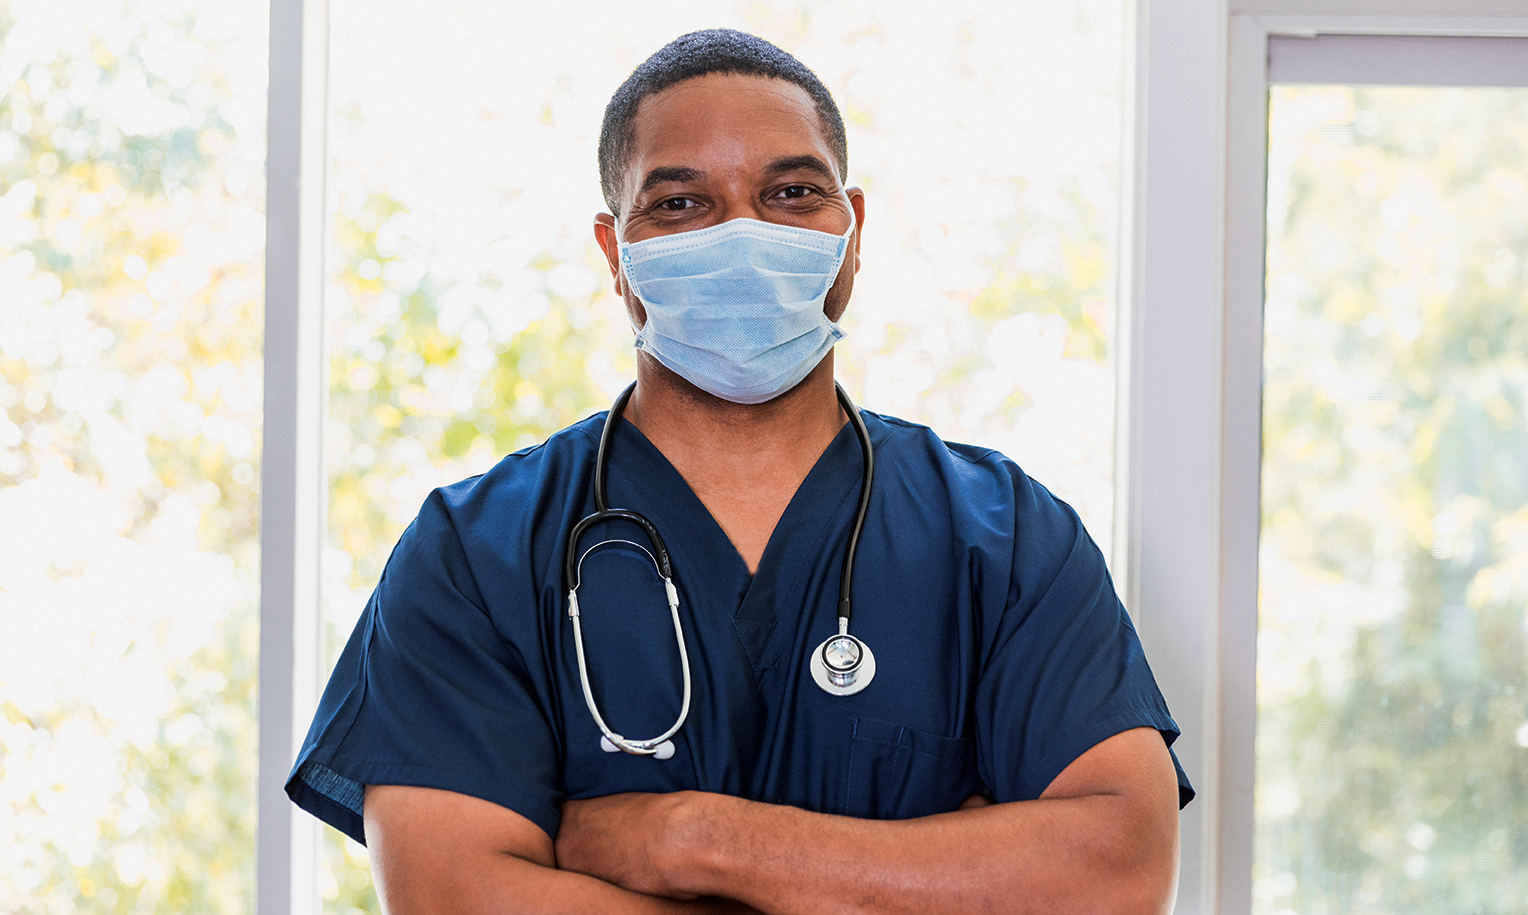 "Male nurse with a mask. scrubs and stethoscope"